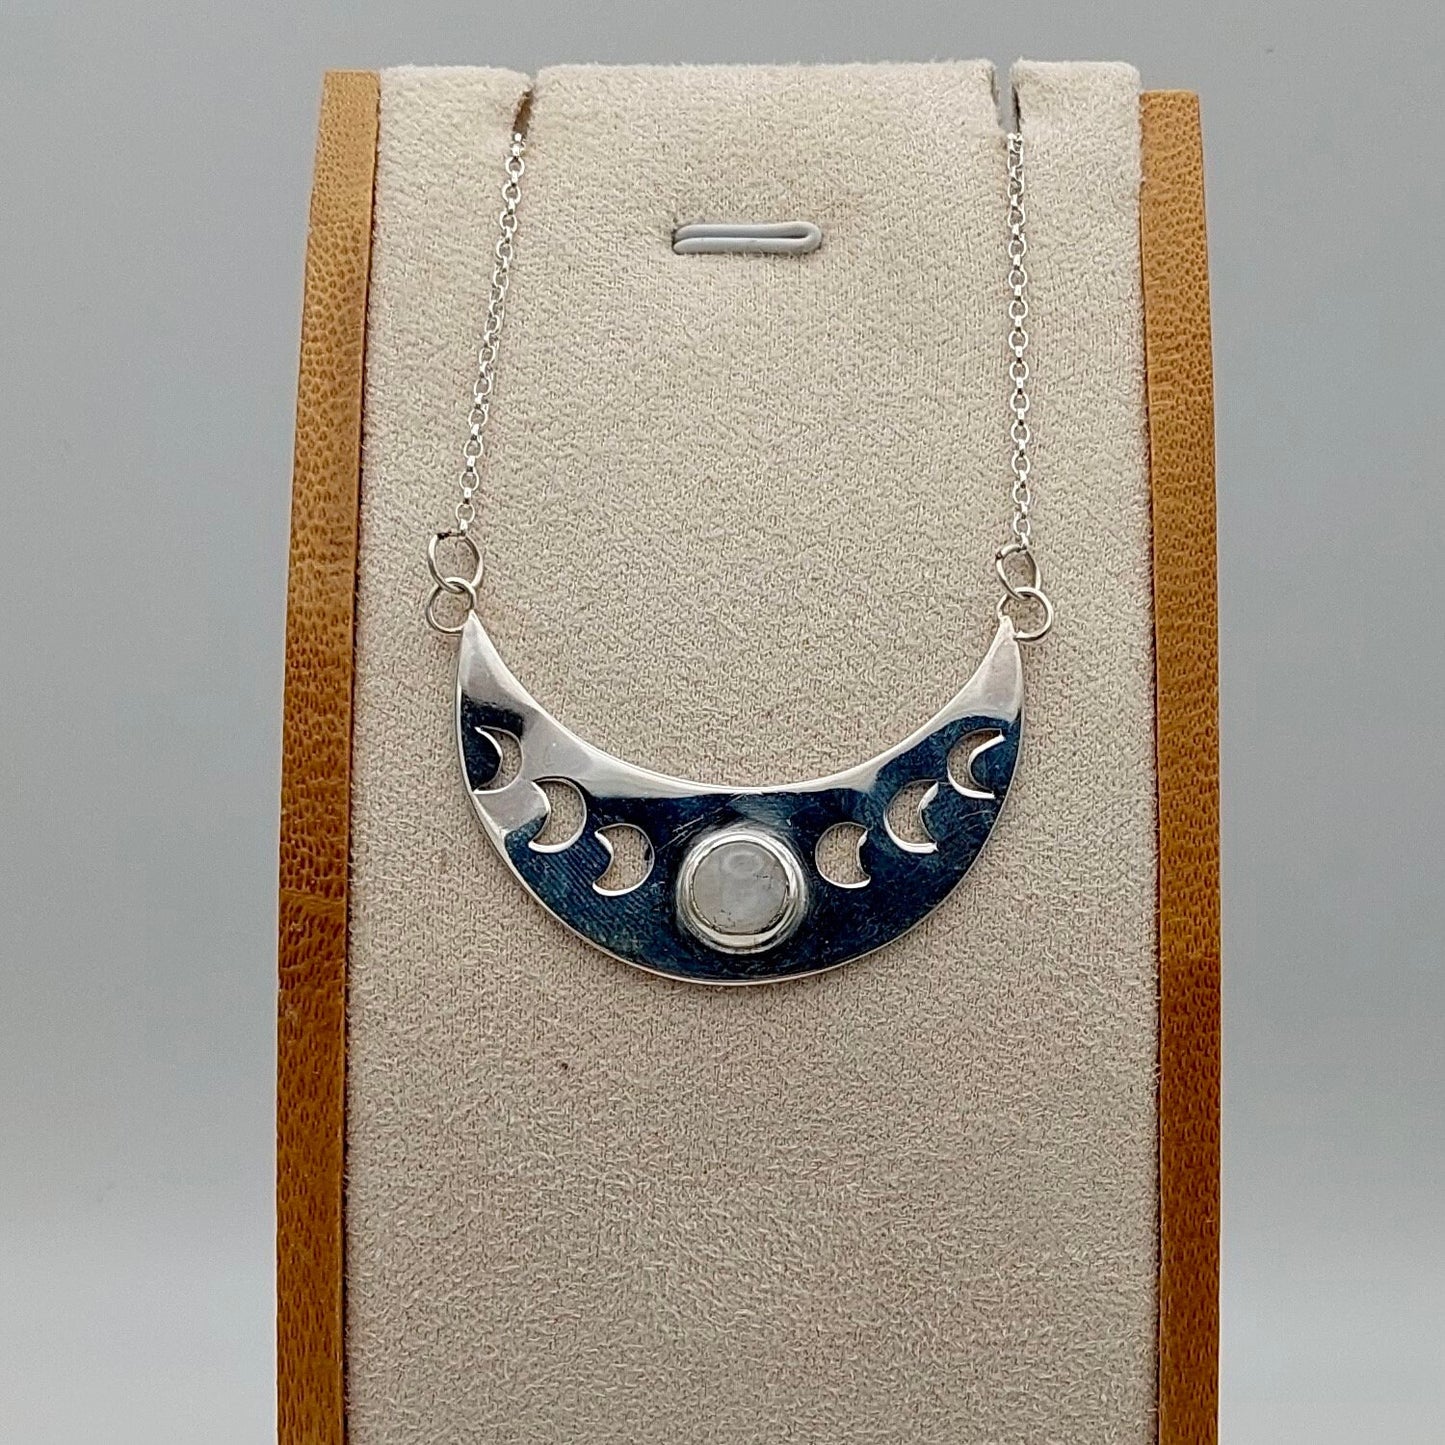 Moon phases and Moonstone - Silver Cresent Moon Necklace